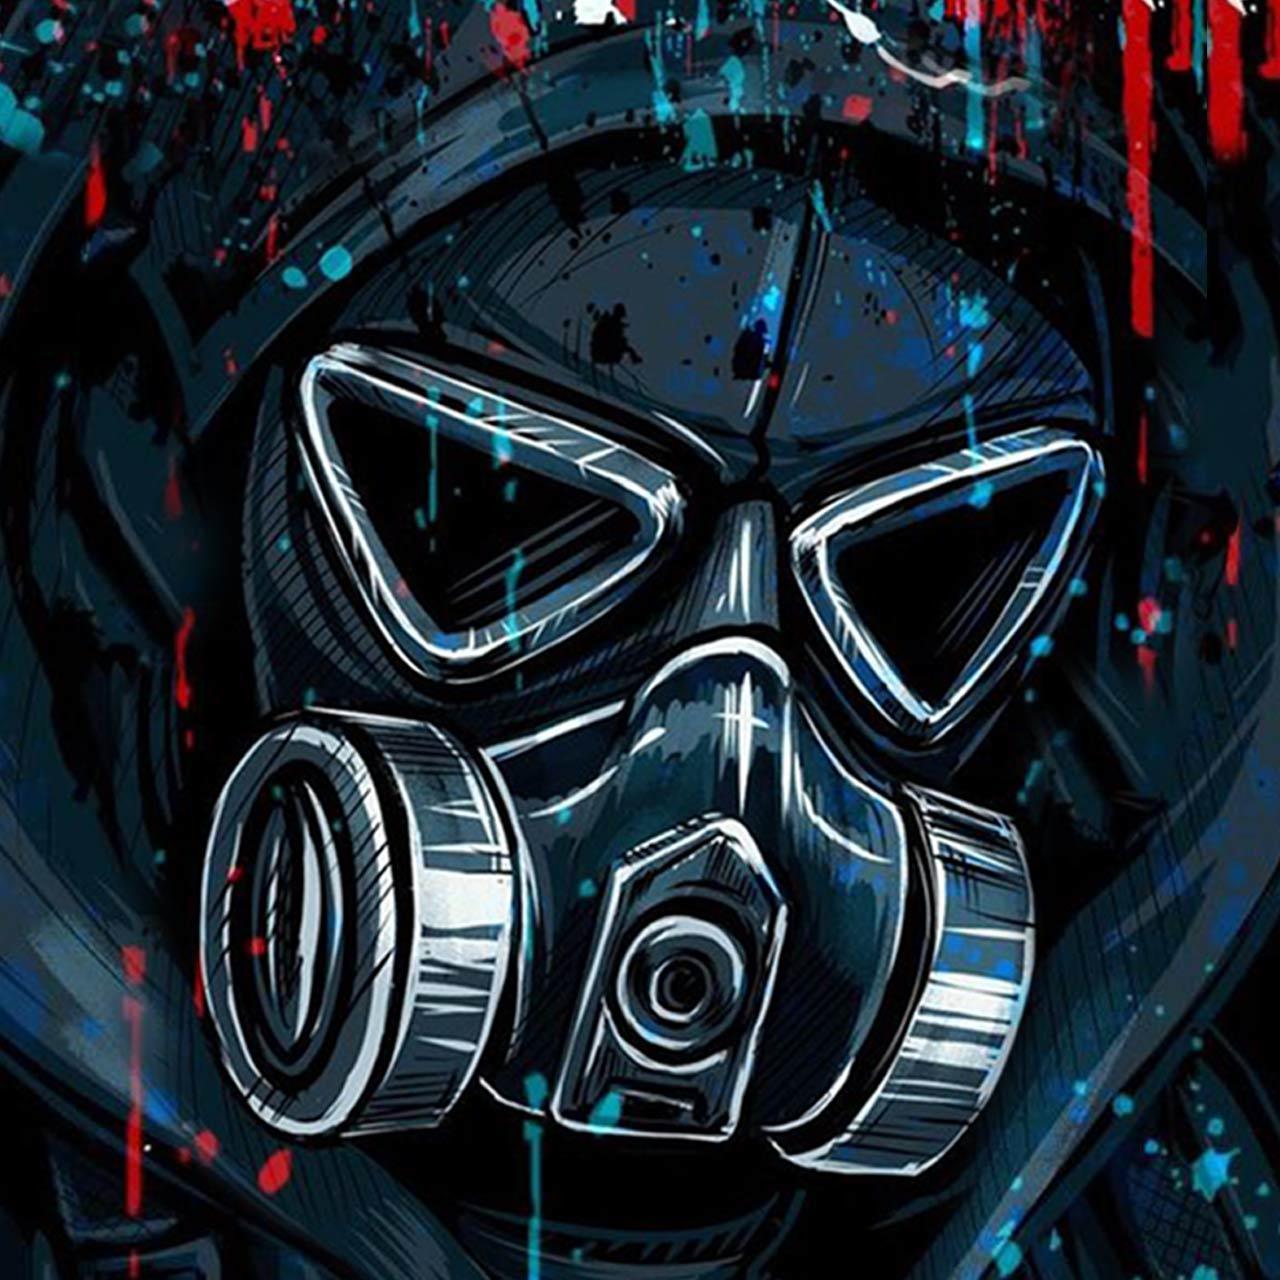 Gas Mask Themes Live Wallpaper For Android Apk Download - gasmask roblox